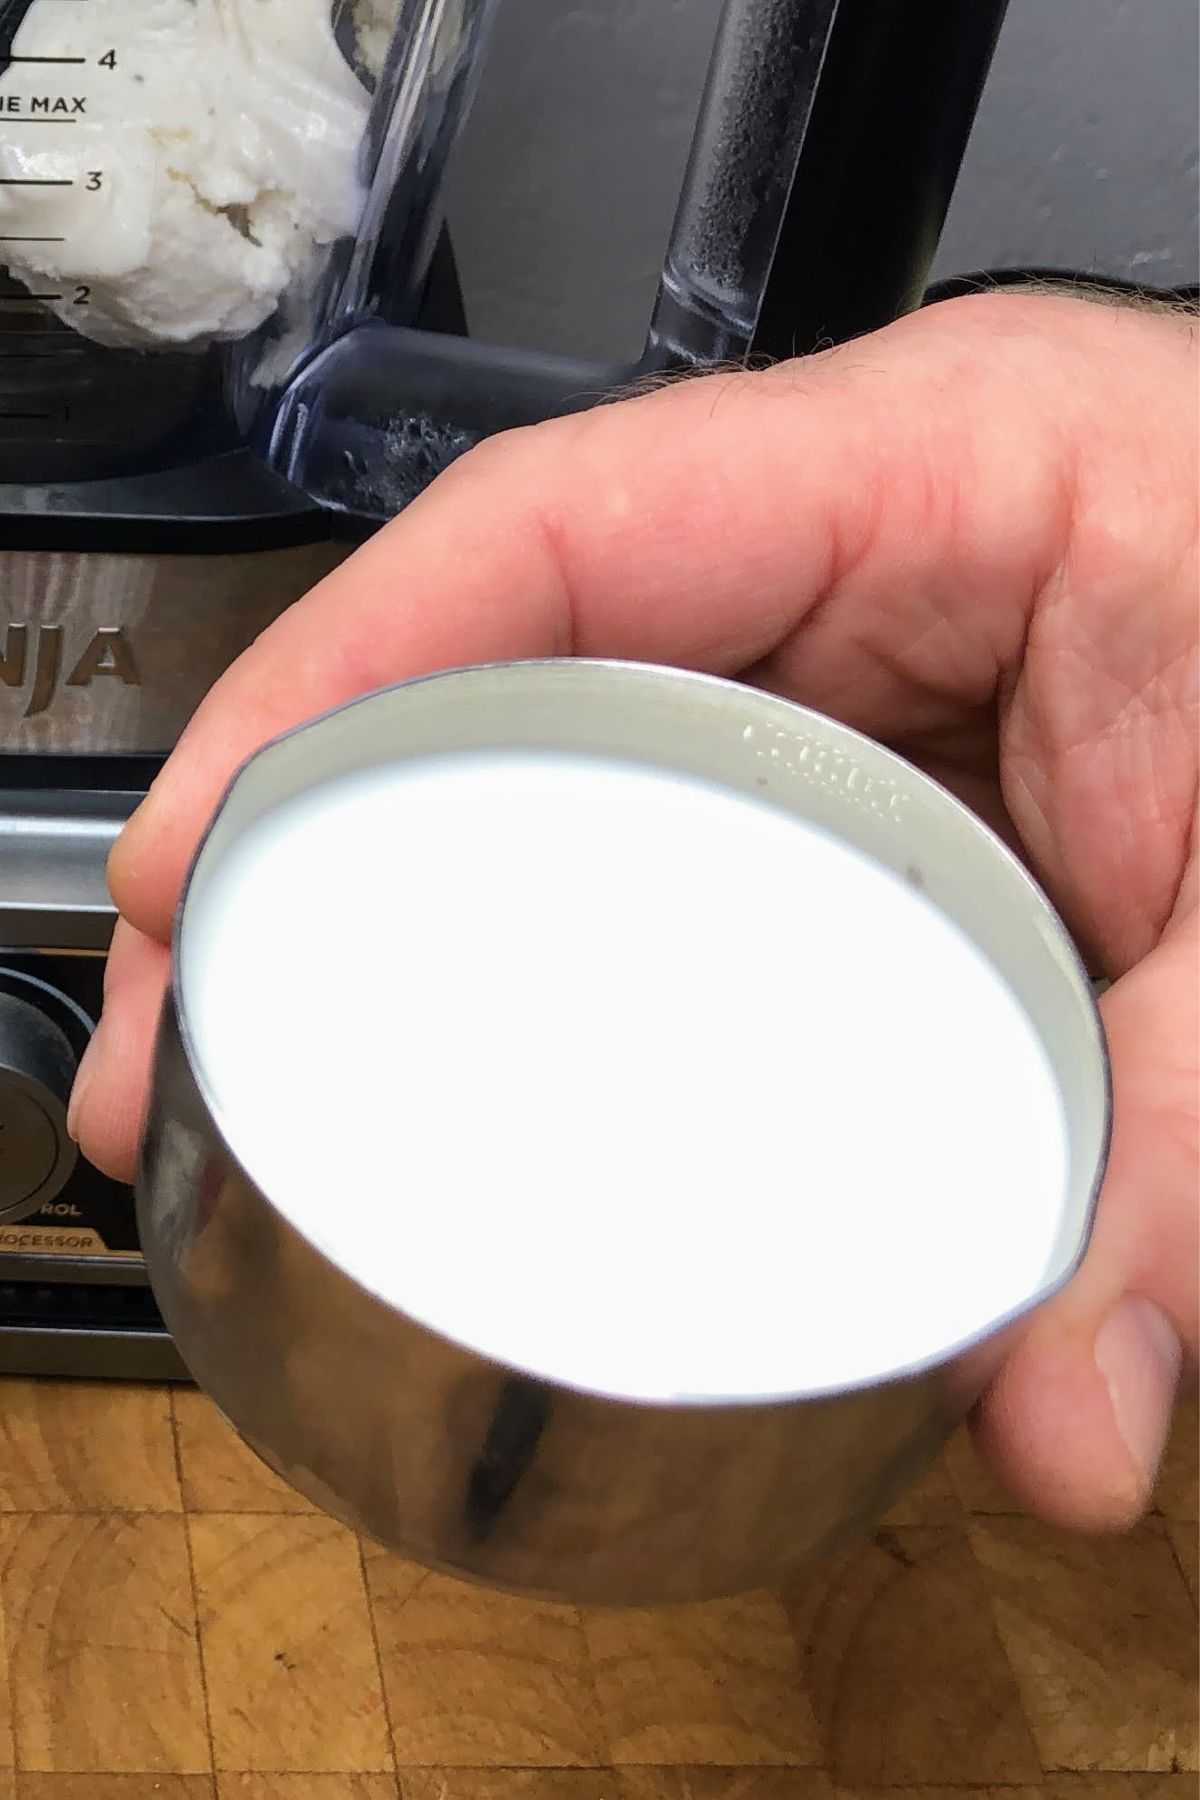 Holding a cup of milk.